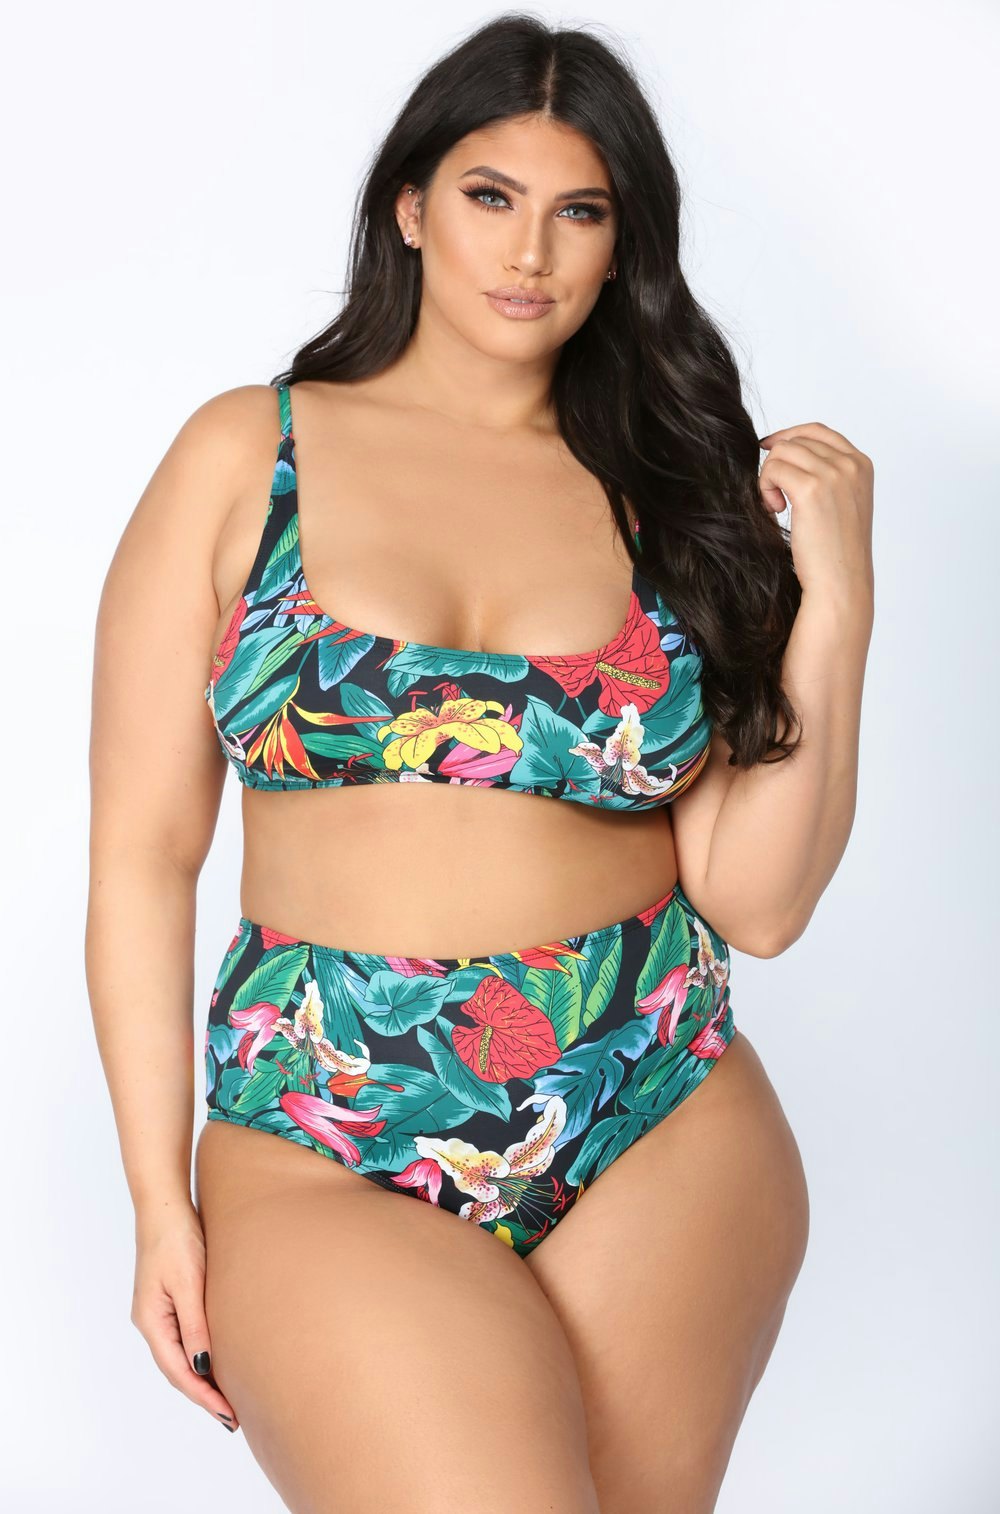 The Best Fashion Nova Curve Pieces To Shop For Fire Summer 2018 Style